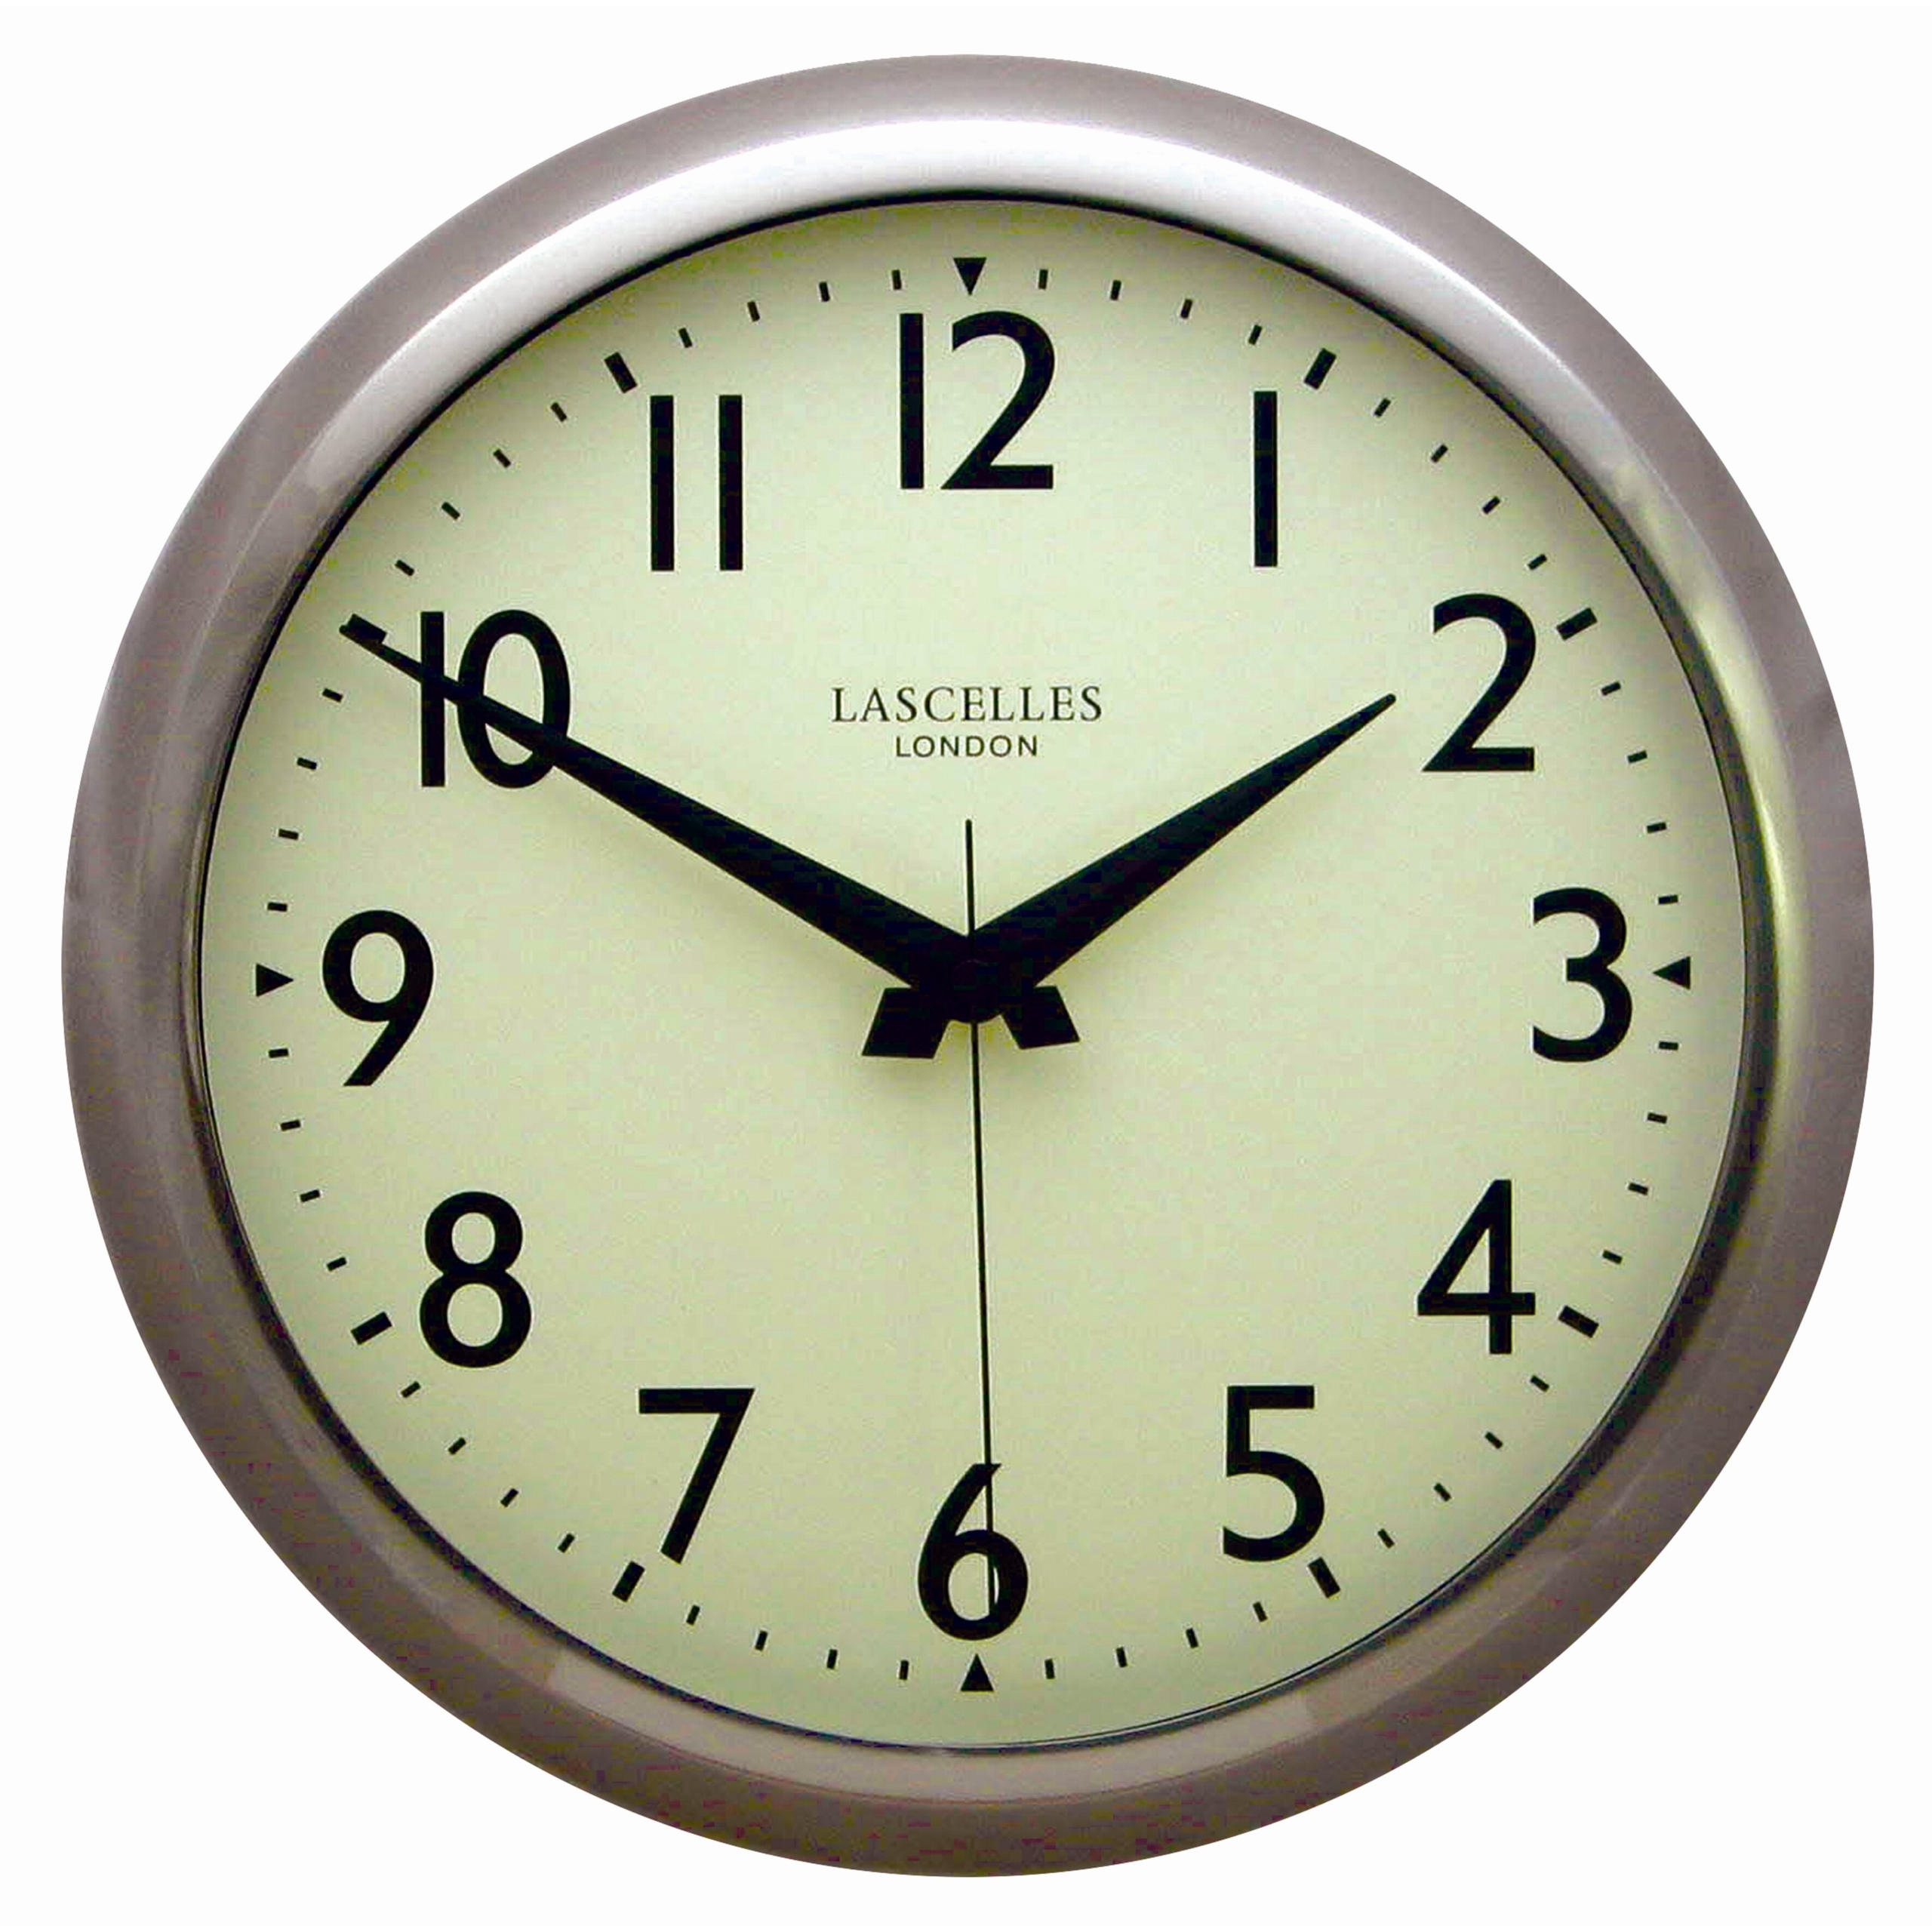 Roger Lascelles Retro Chrome Wall Clock, with Sweep Seconds Hand, 11.8-Inch